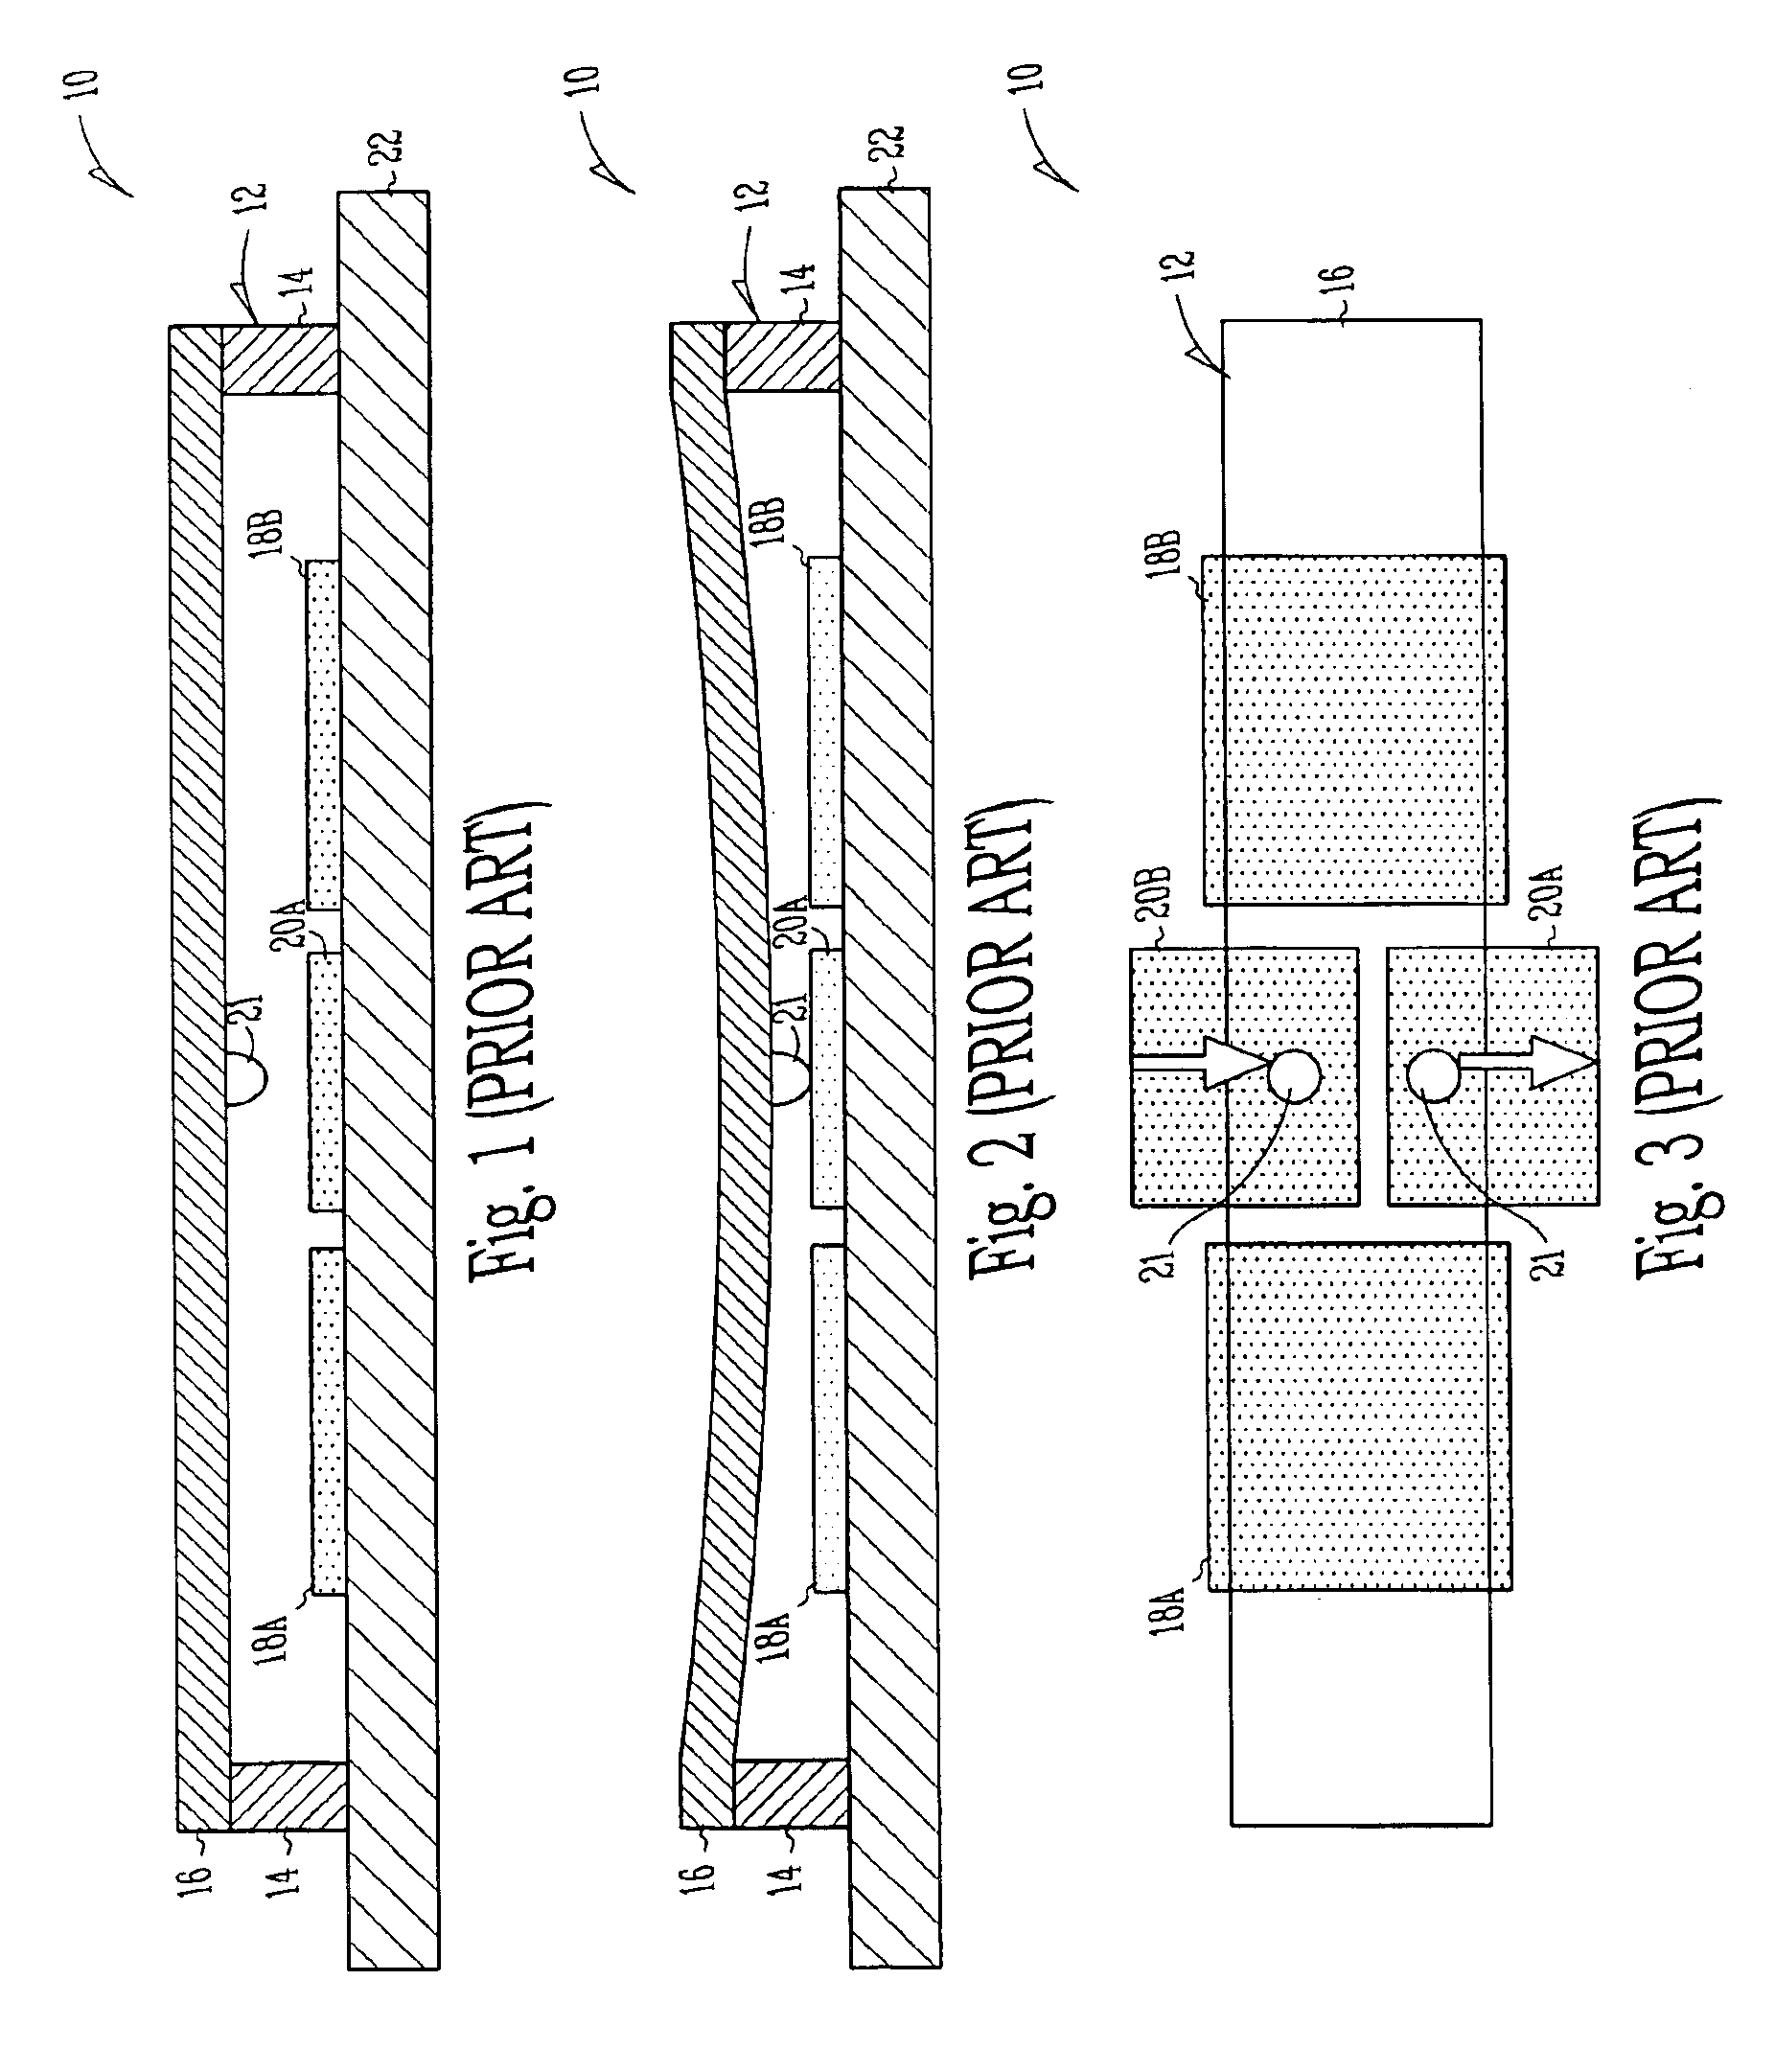 Electrode configuration in a MEMS switch